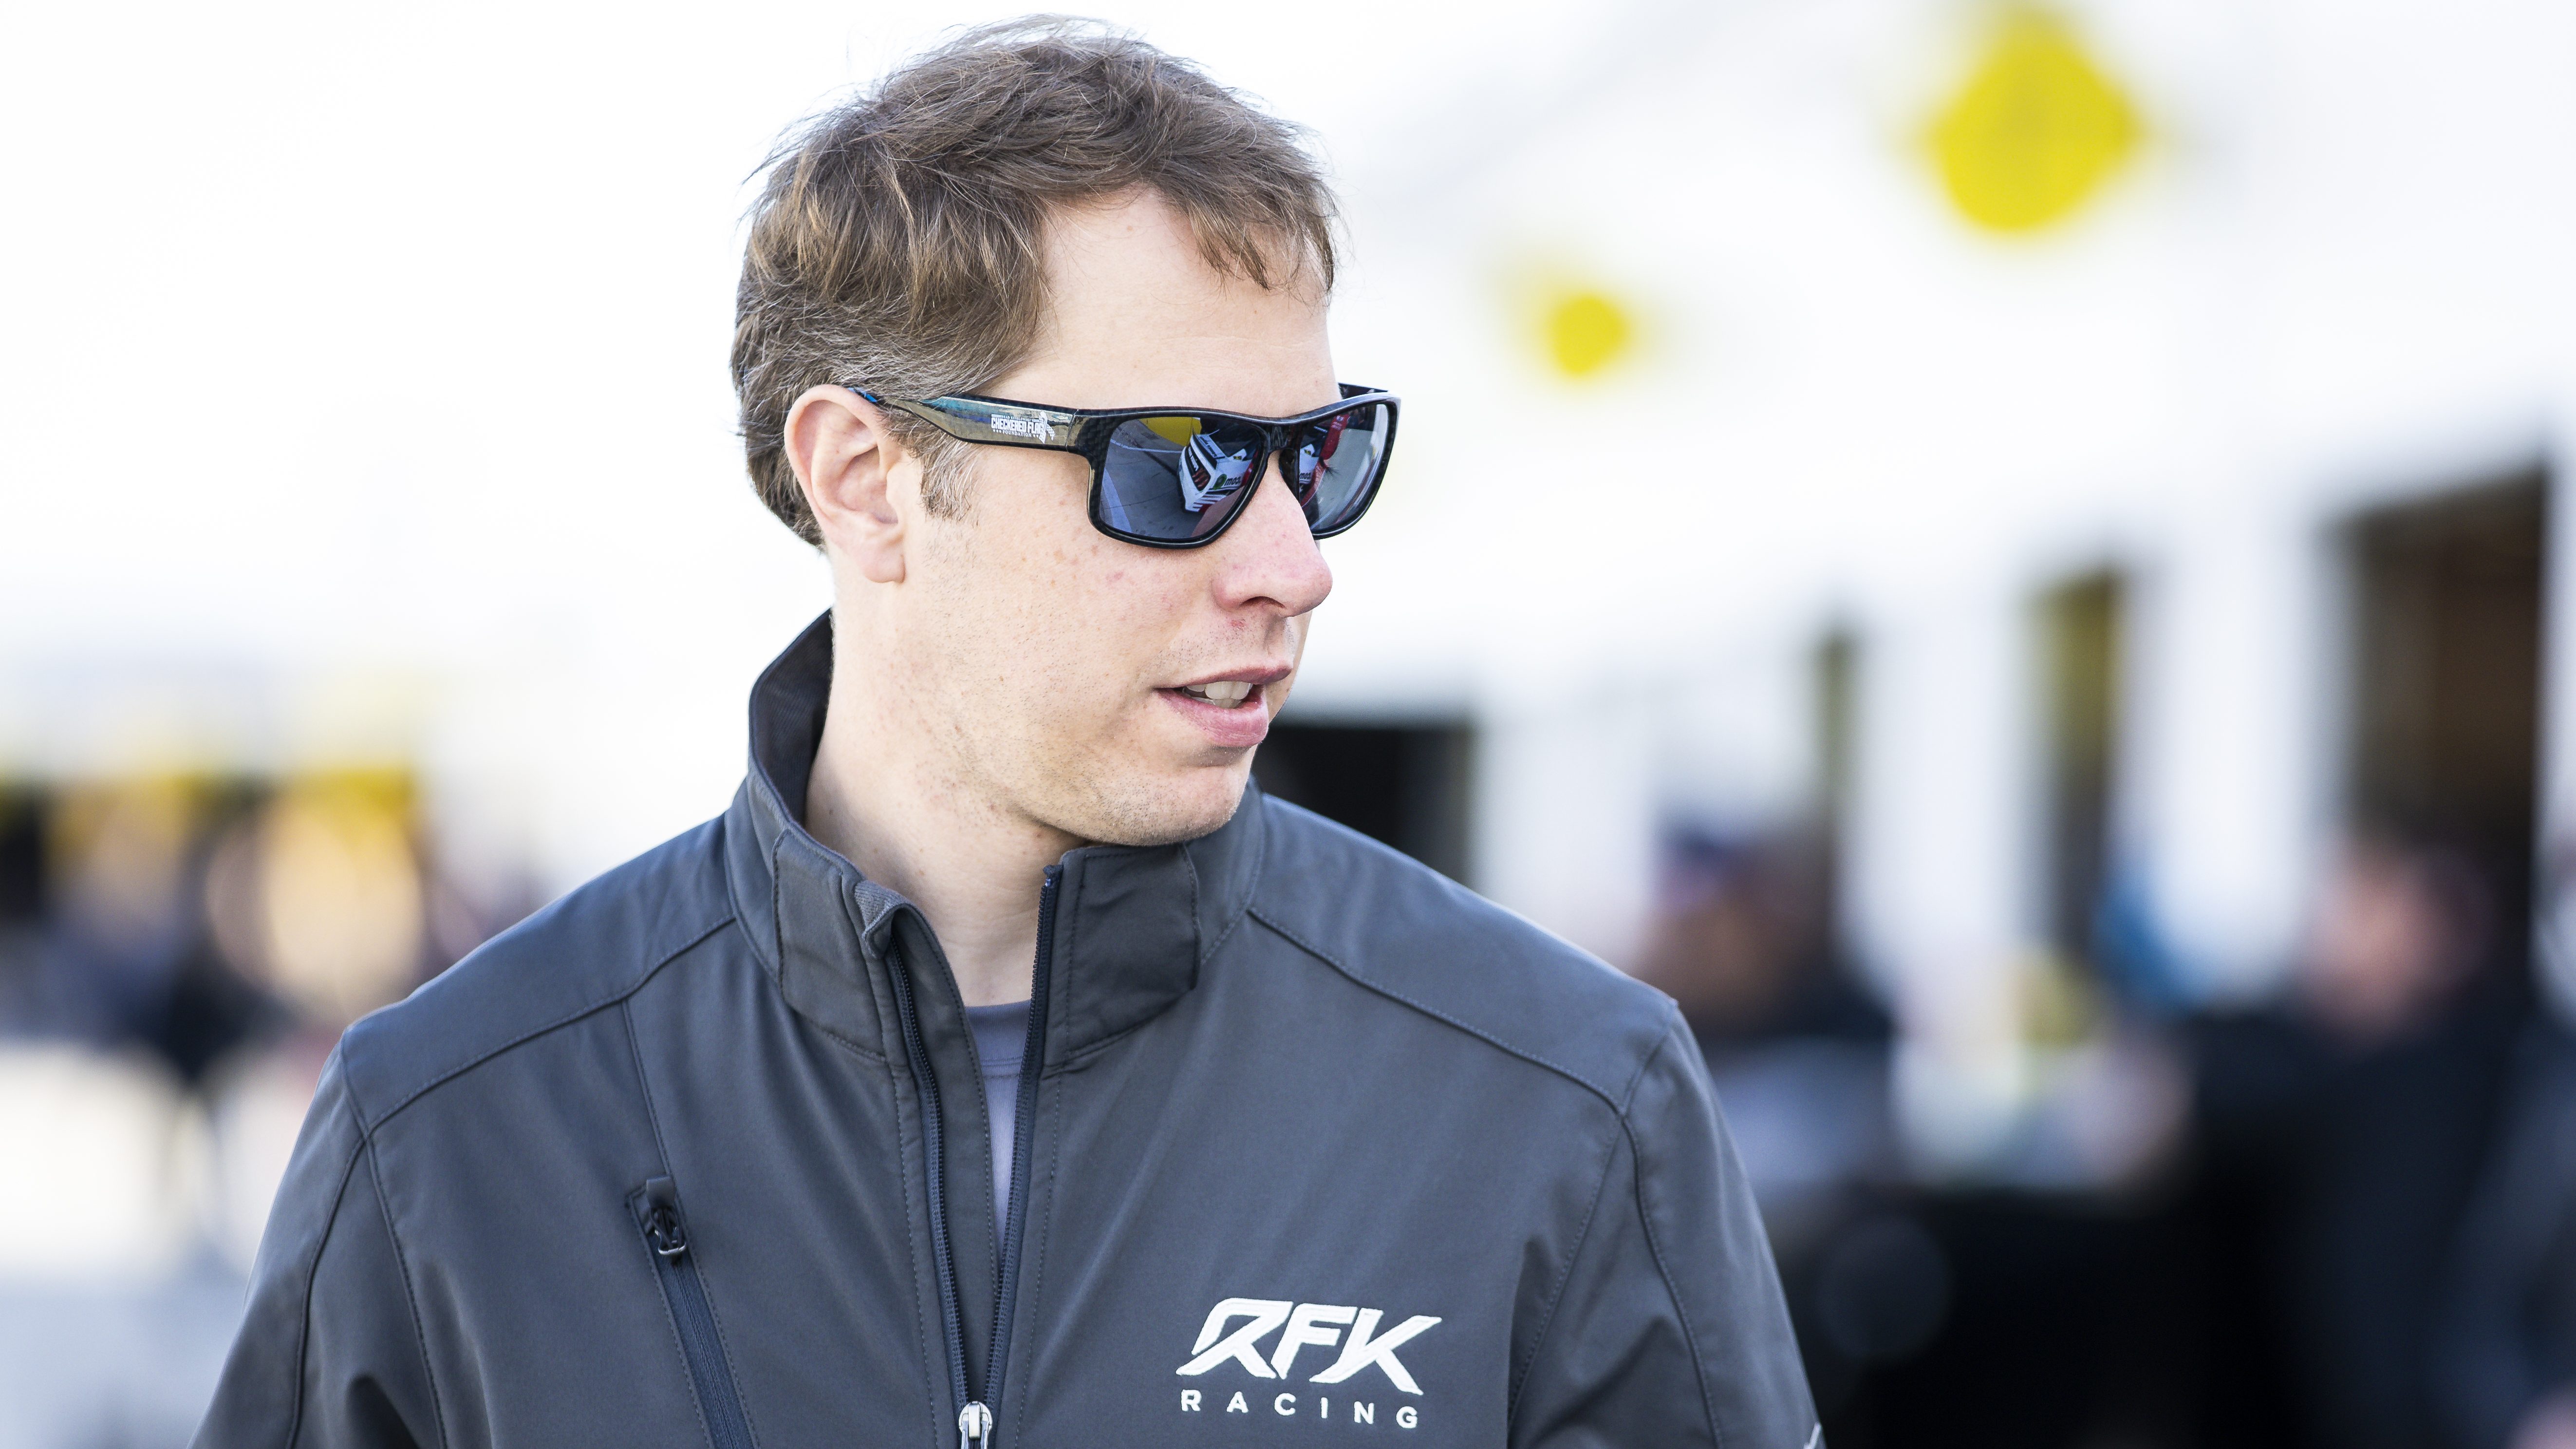 RFK Racing Secures New Partner for 2022